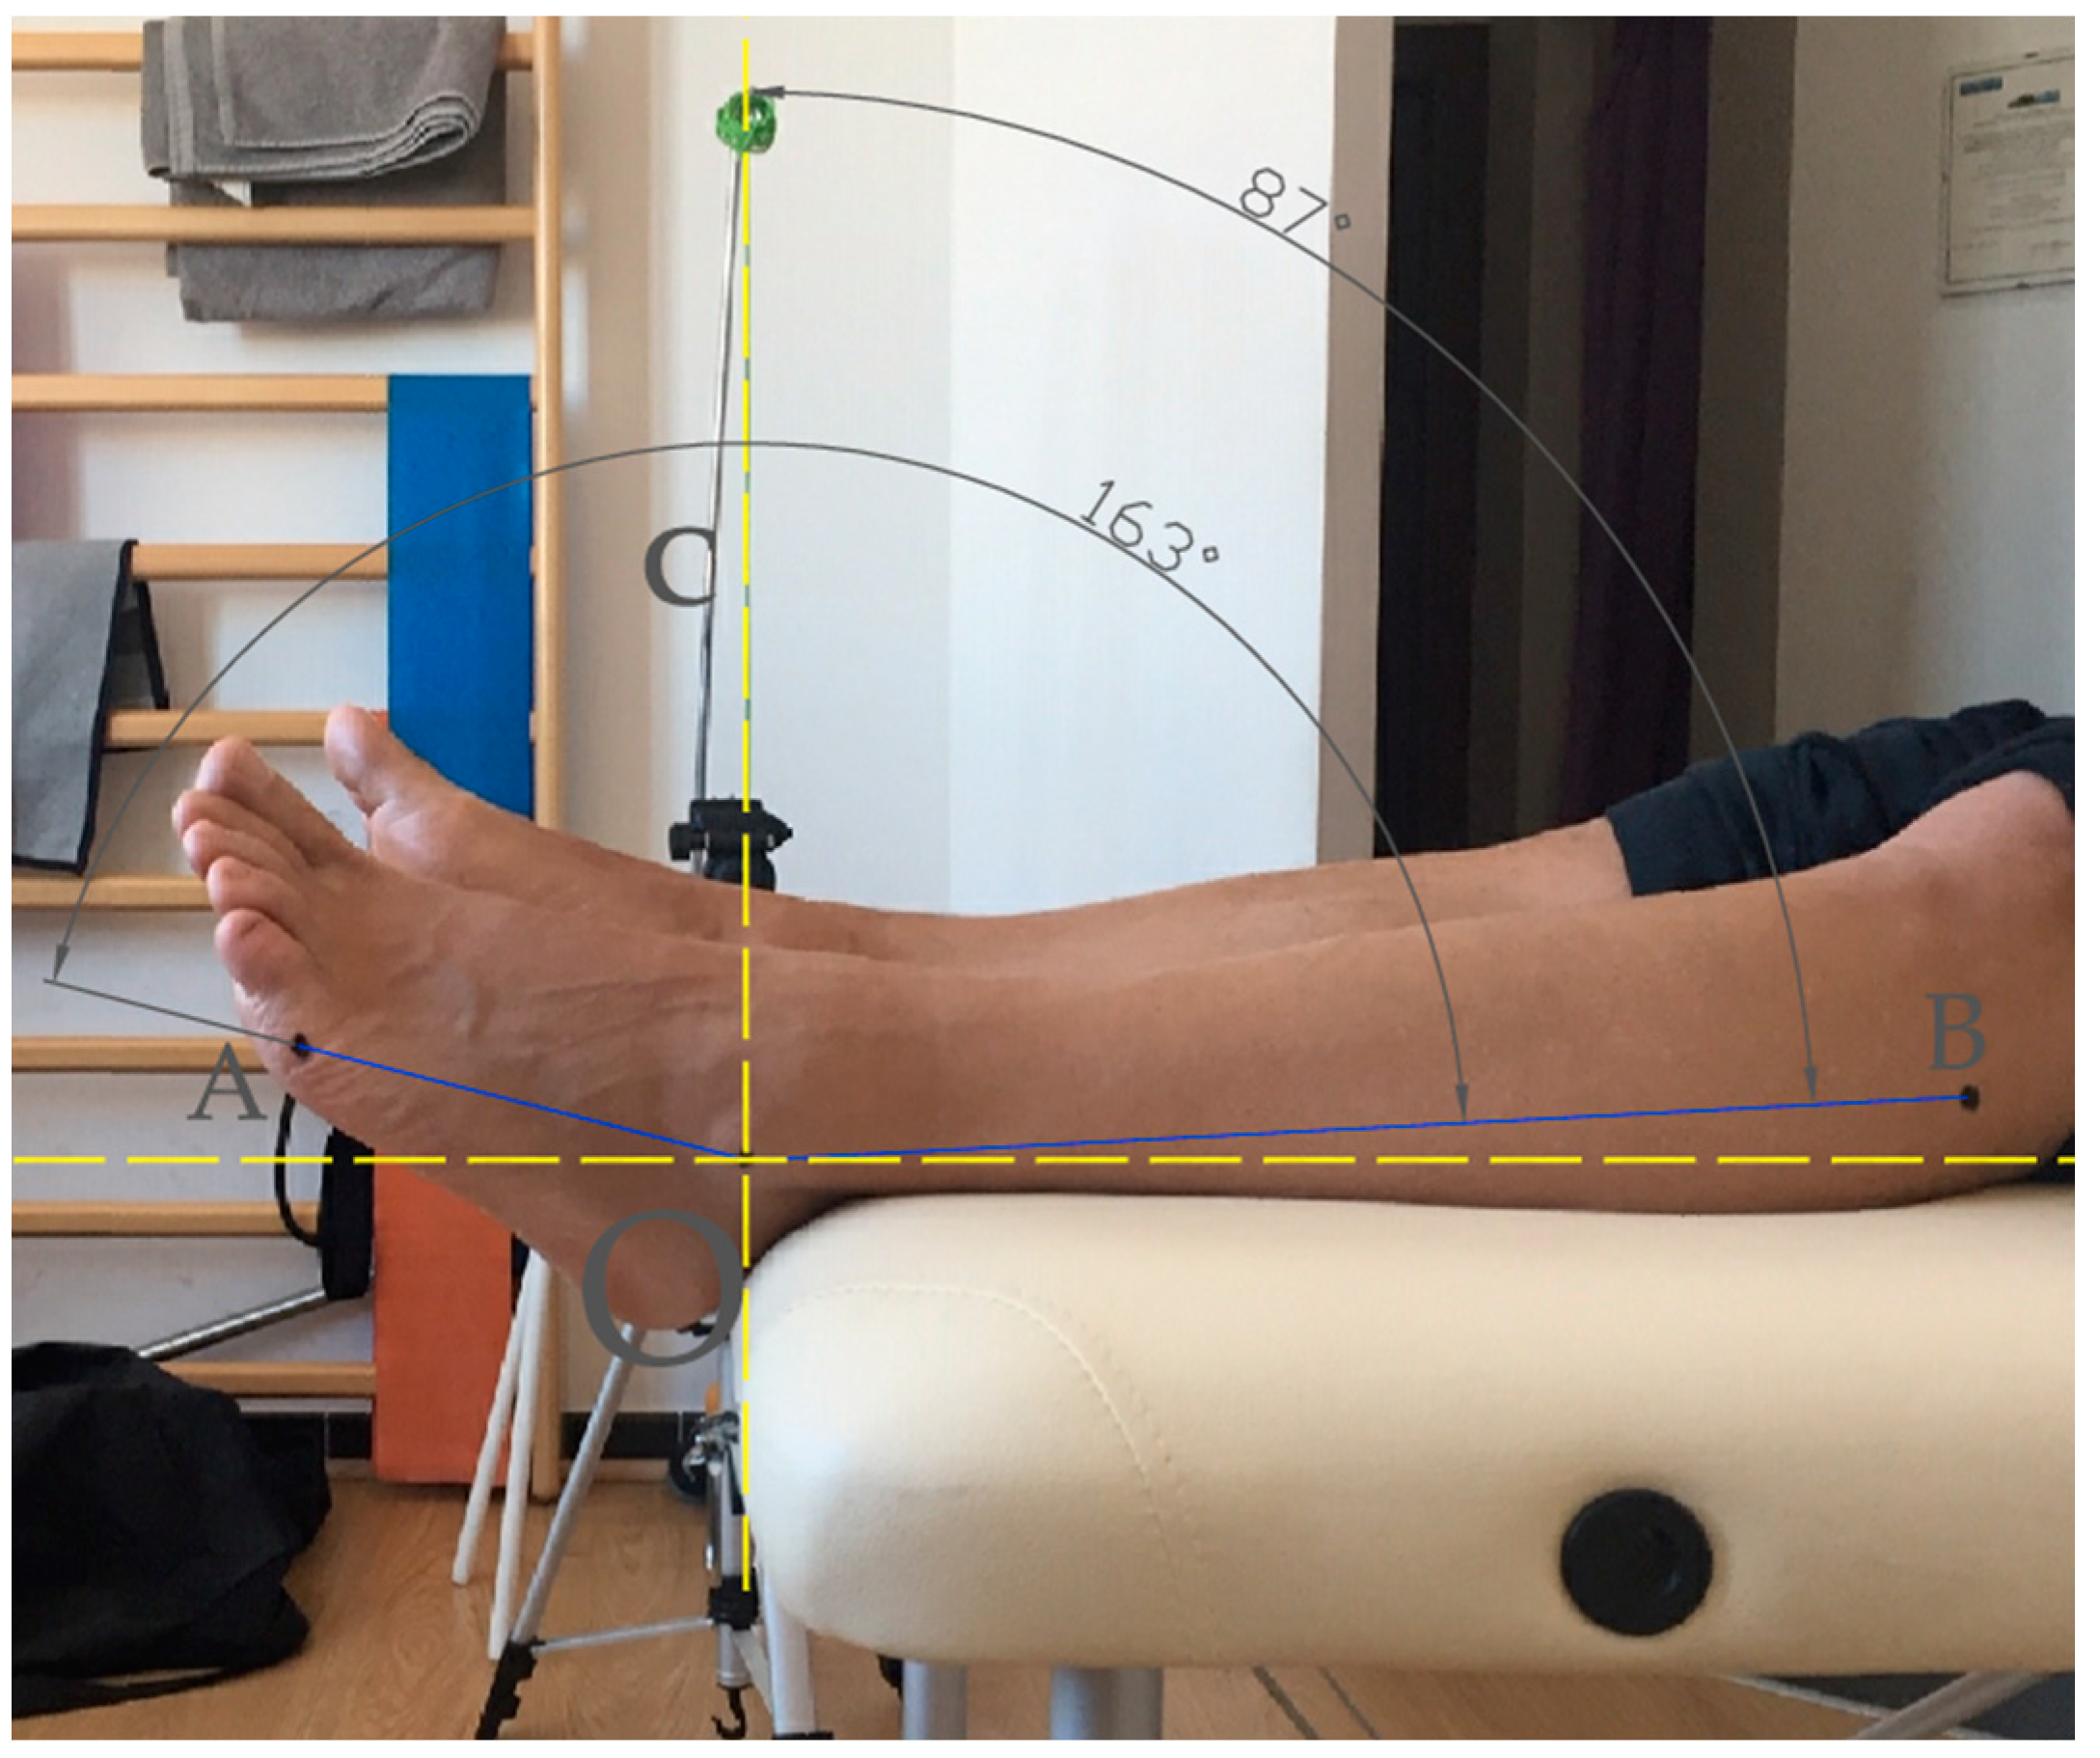 Sports | Free Full-Text | The Assessment of Ankle Range-of-Motion and Its  Relationship with Overall Muscle Strength in a Cross-Section of Soccer  Players